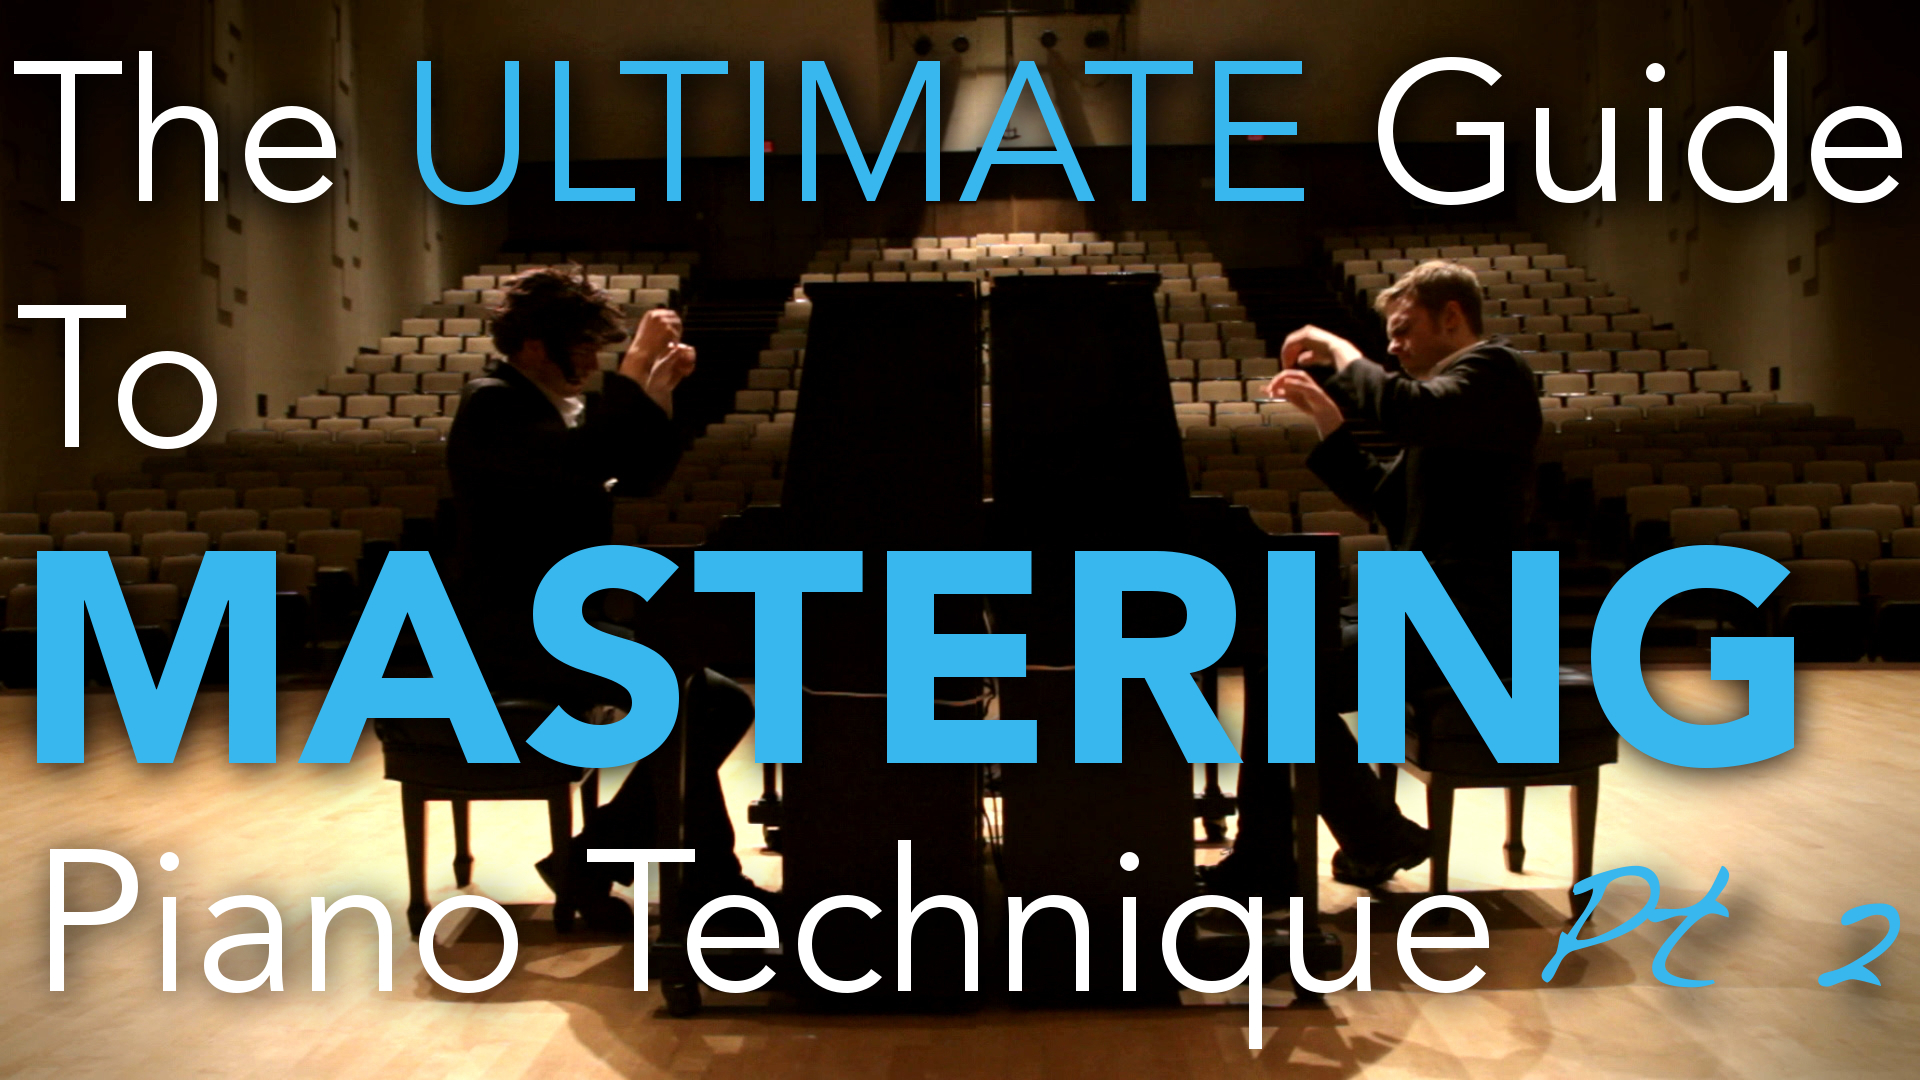 The ultimate guide to mastering piano technique pt 2 thumbnail